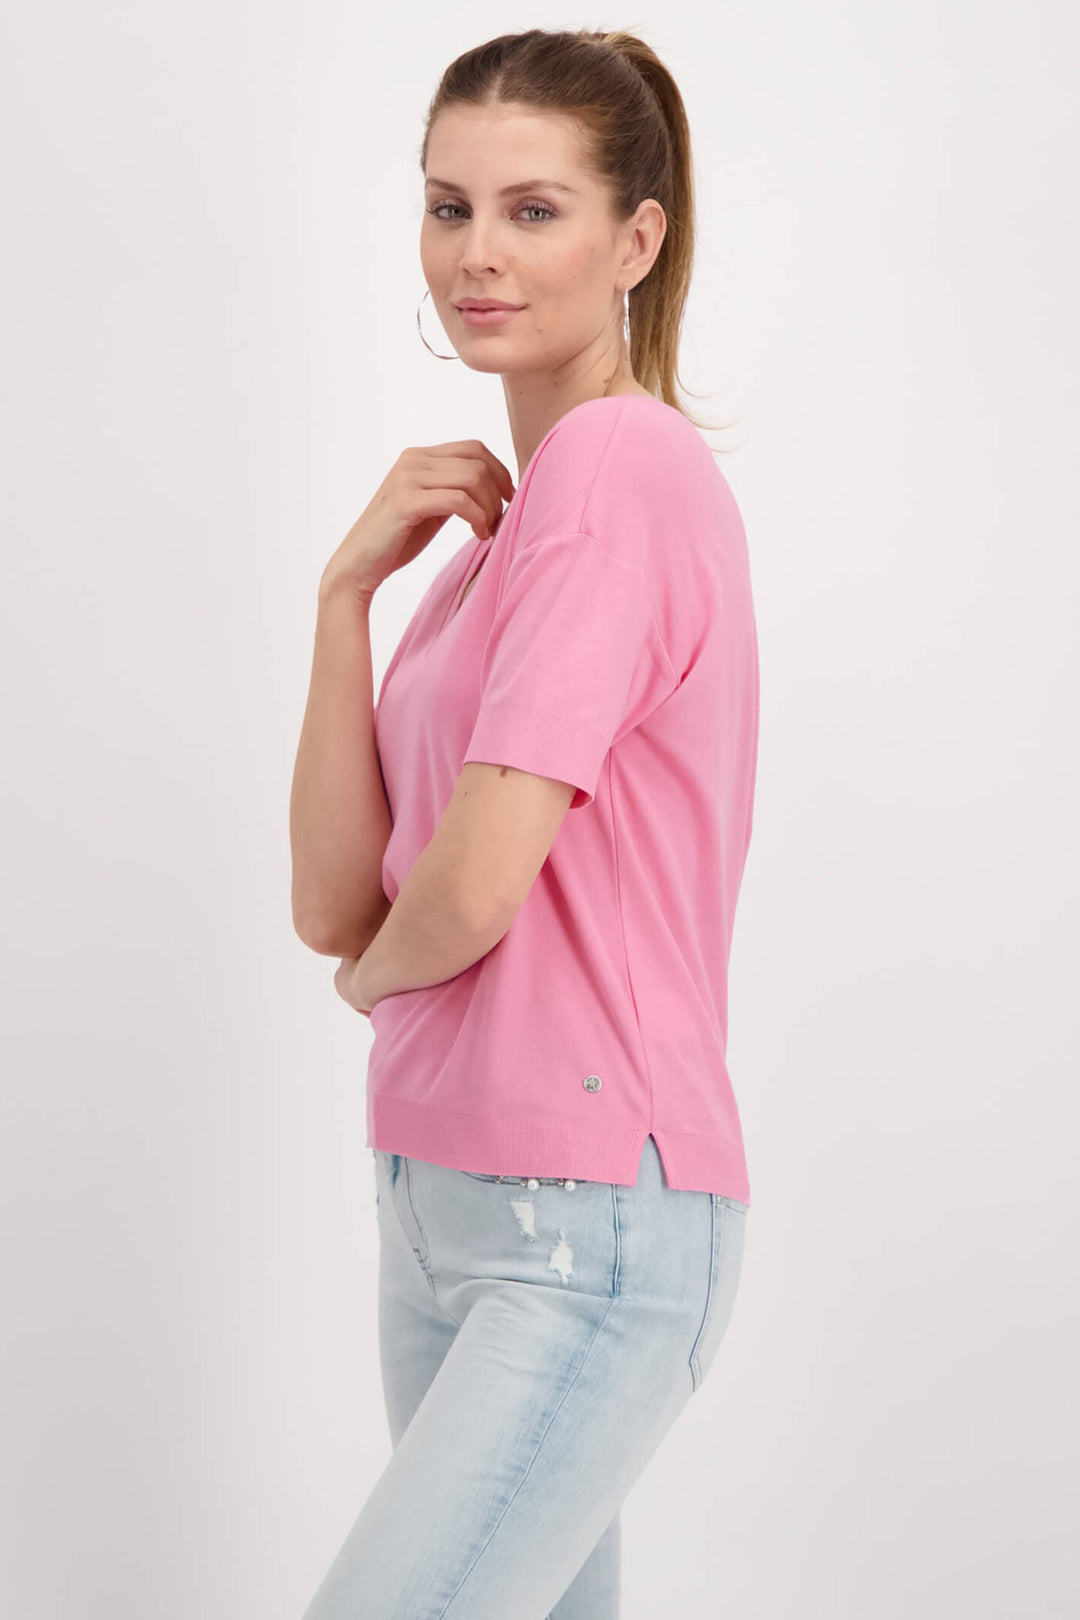 Monari 406773 Pink Knitted T-Shirt - Experience Boutique